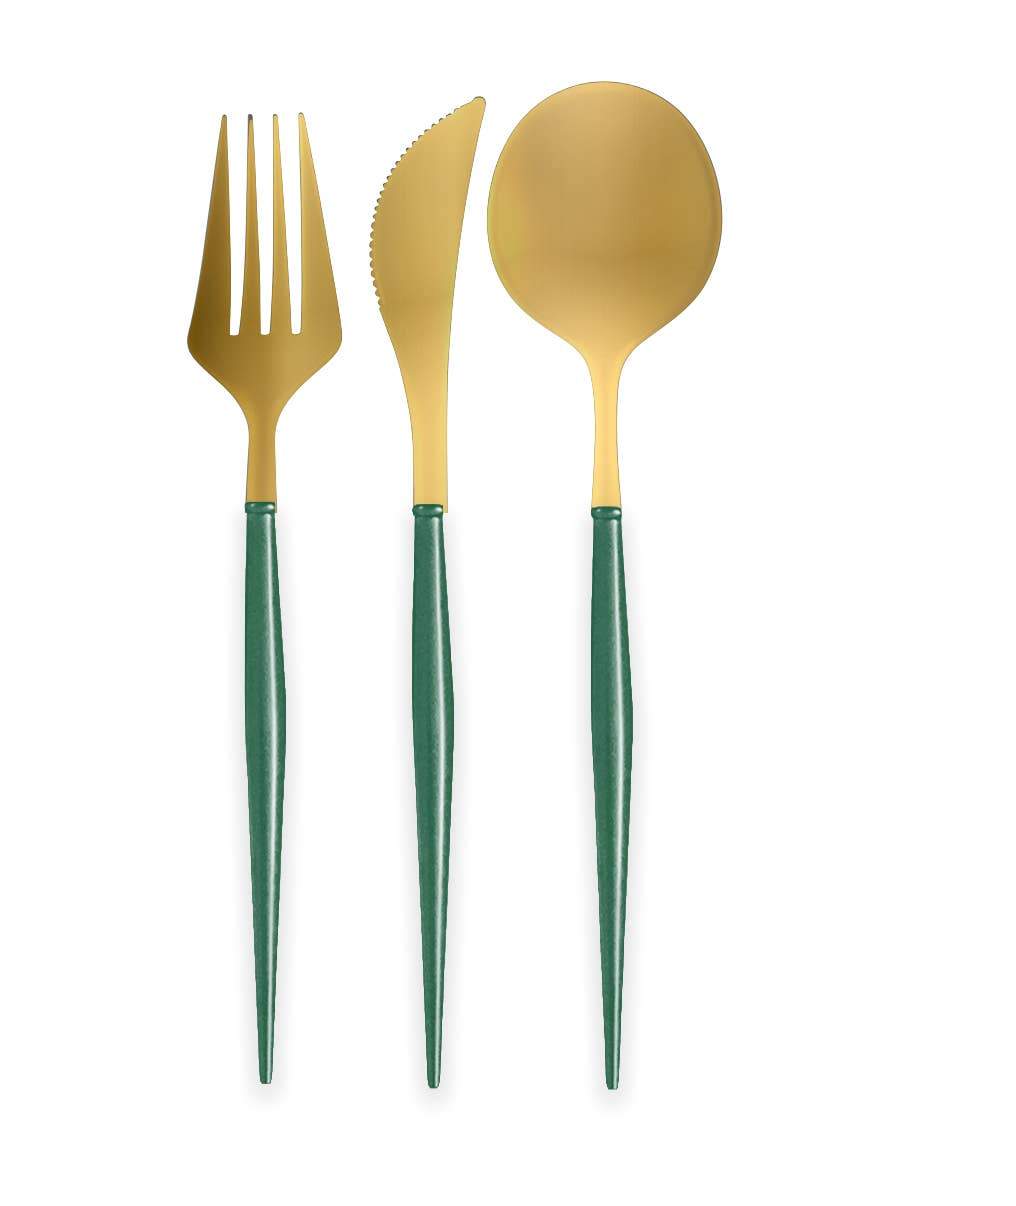 BELLA GOLD AND EMERALD CUTLERY Sophistiplate Cutlery Bonjour Fete - Party Supplies